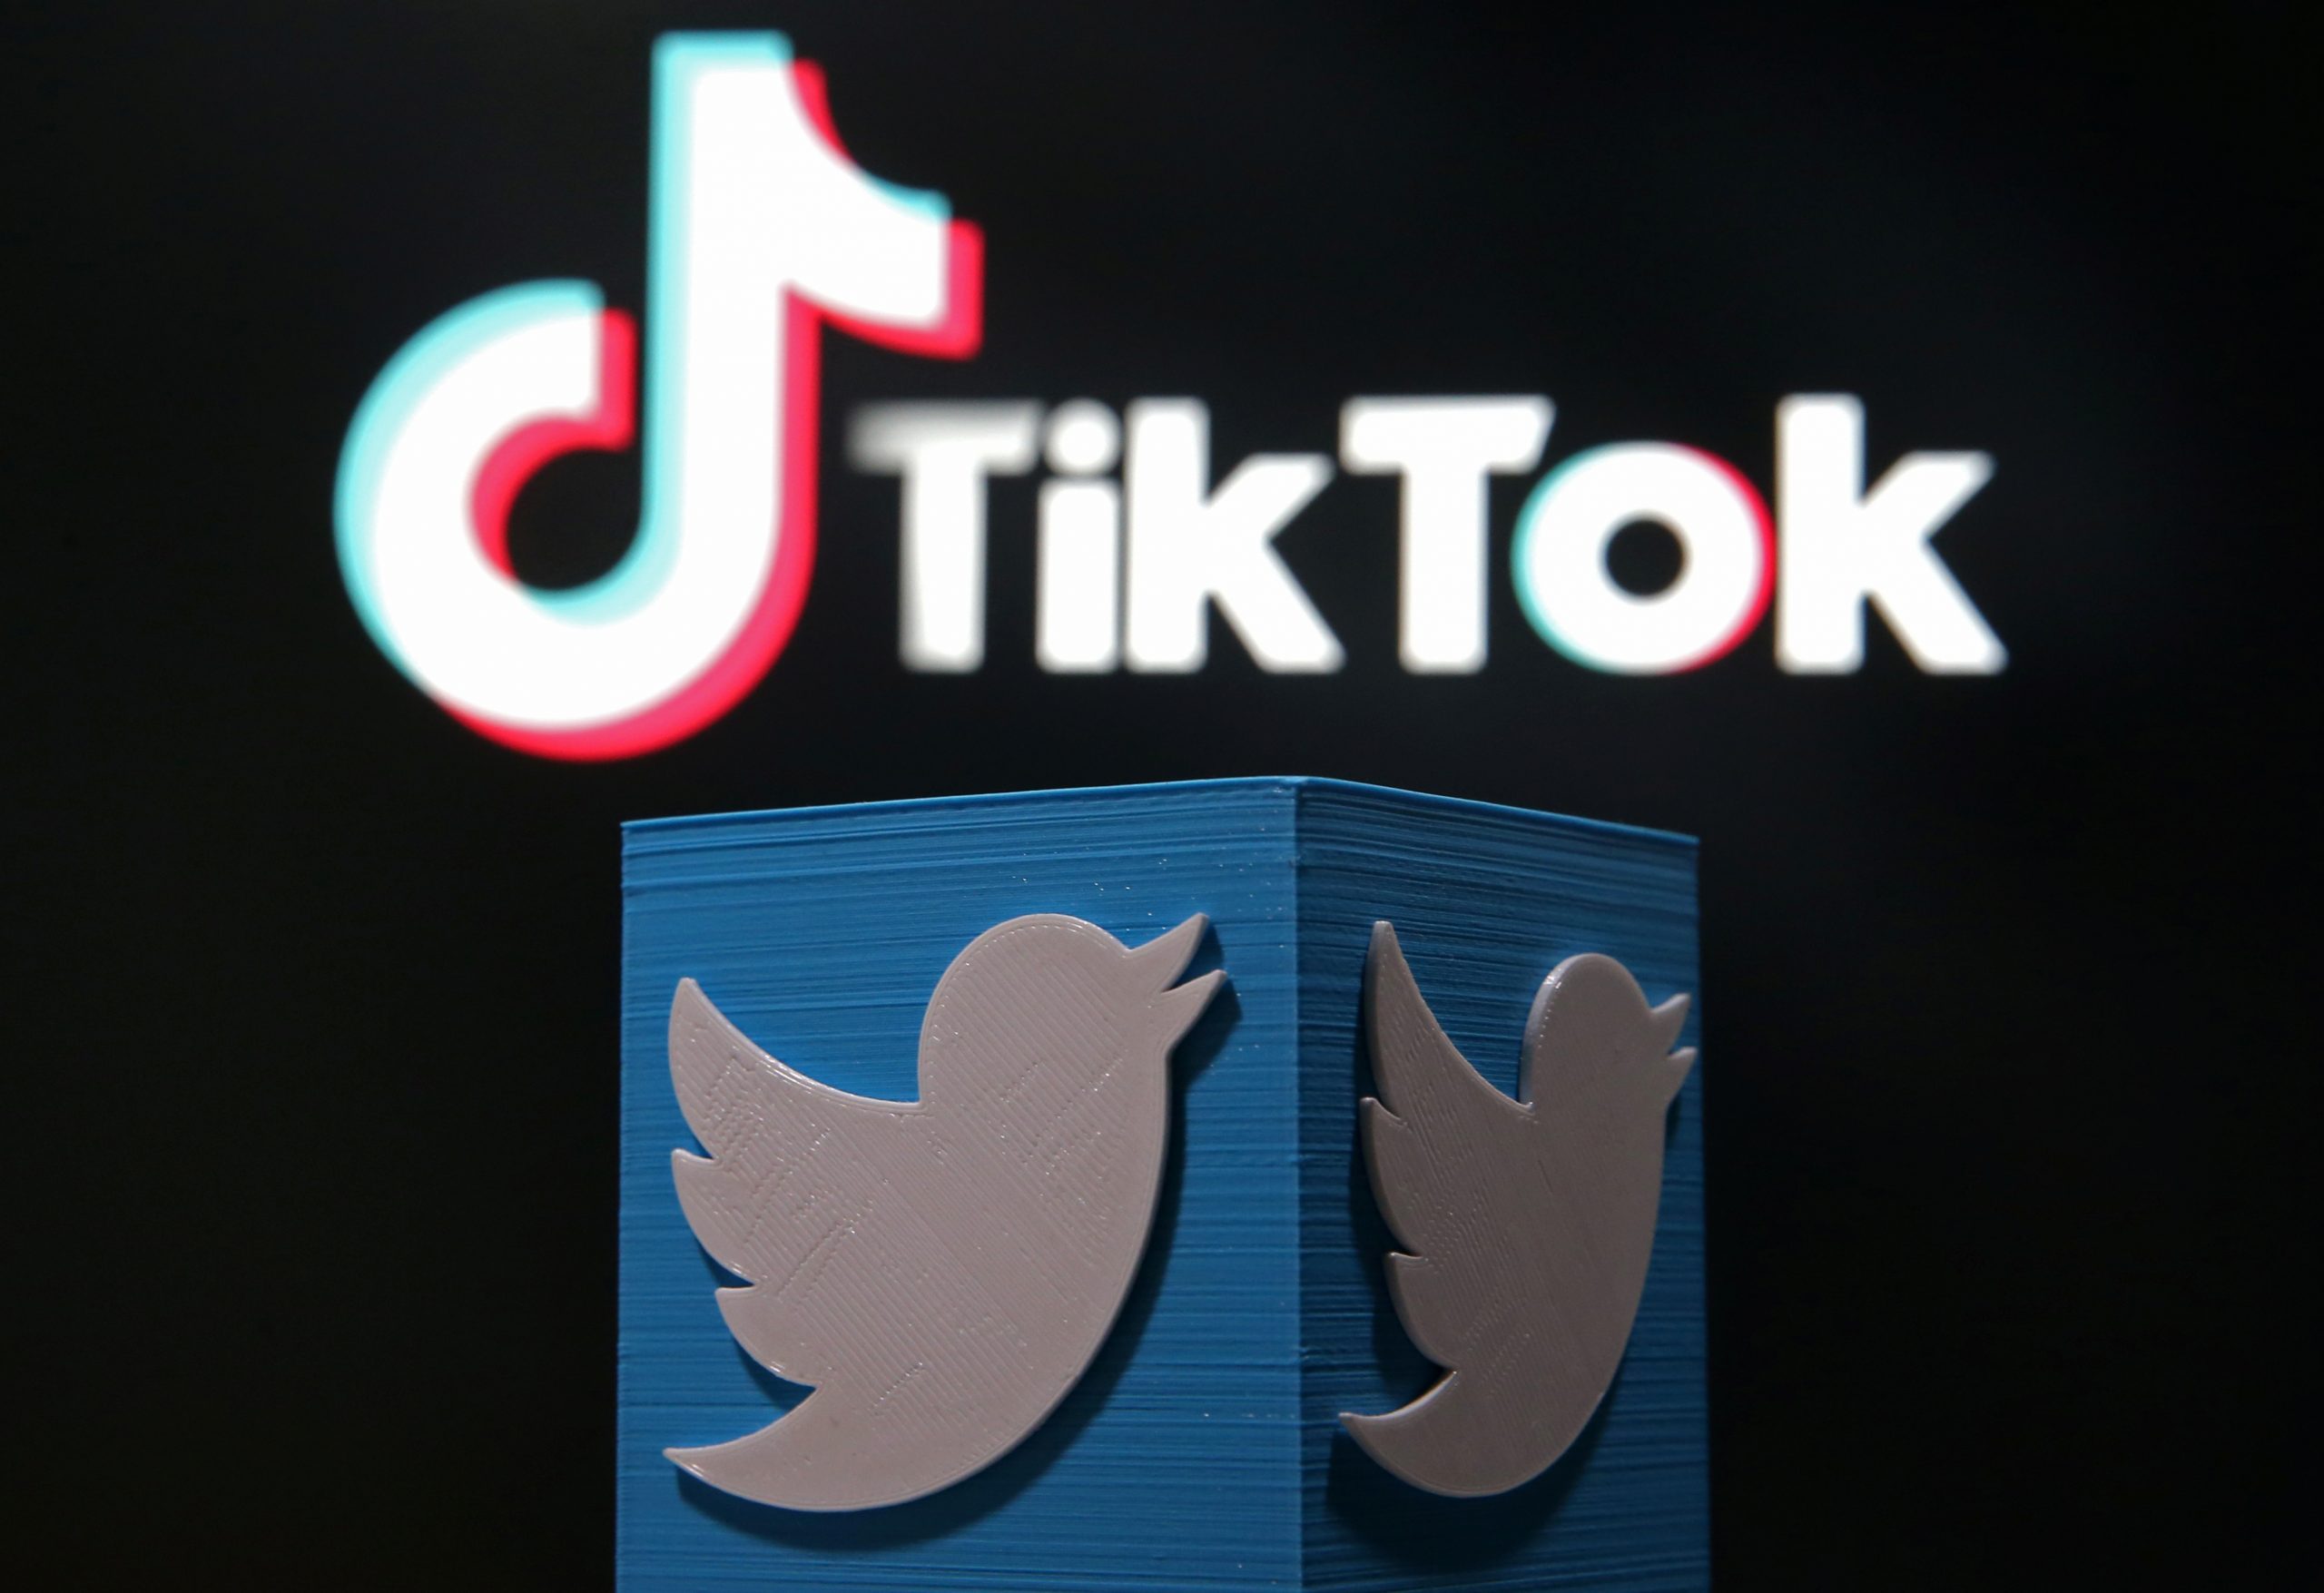 A 3D-printed Twitter logo is placed in front of a displayed Tik Tok logo in this illustration picture A 3D-printed Twitter logo is placed in front of a displayed Tik Tok logo in this illustration picture taken August 9, 2020. REUTERS/Dado Ruvic/Illustration DADO RUVIC